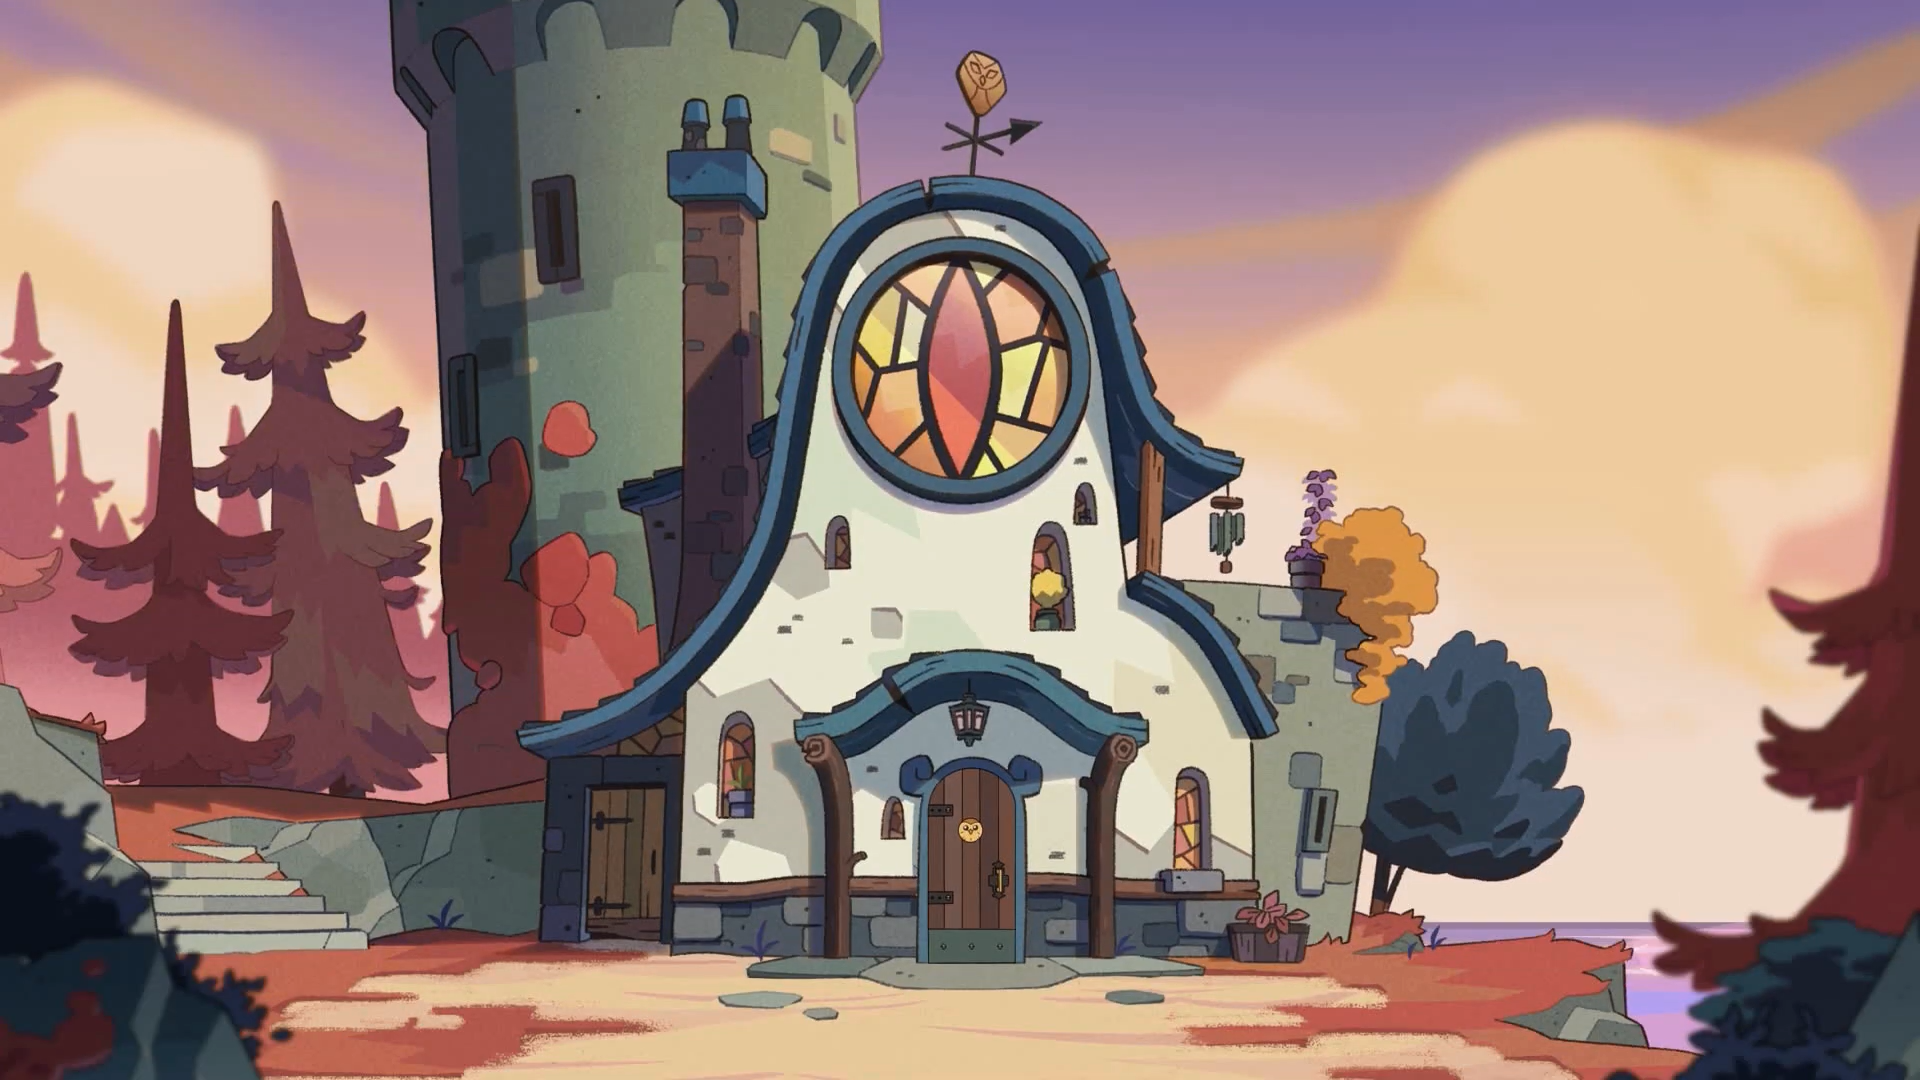 https://static.wikia.nocookie.net/disney/images/1/14/The_Owl_House_33.png/revision/latest?cb=20190720073620